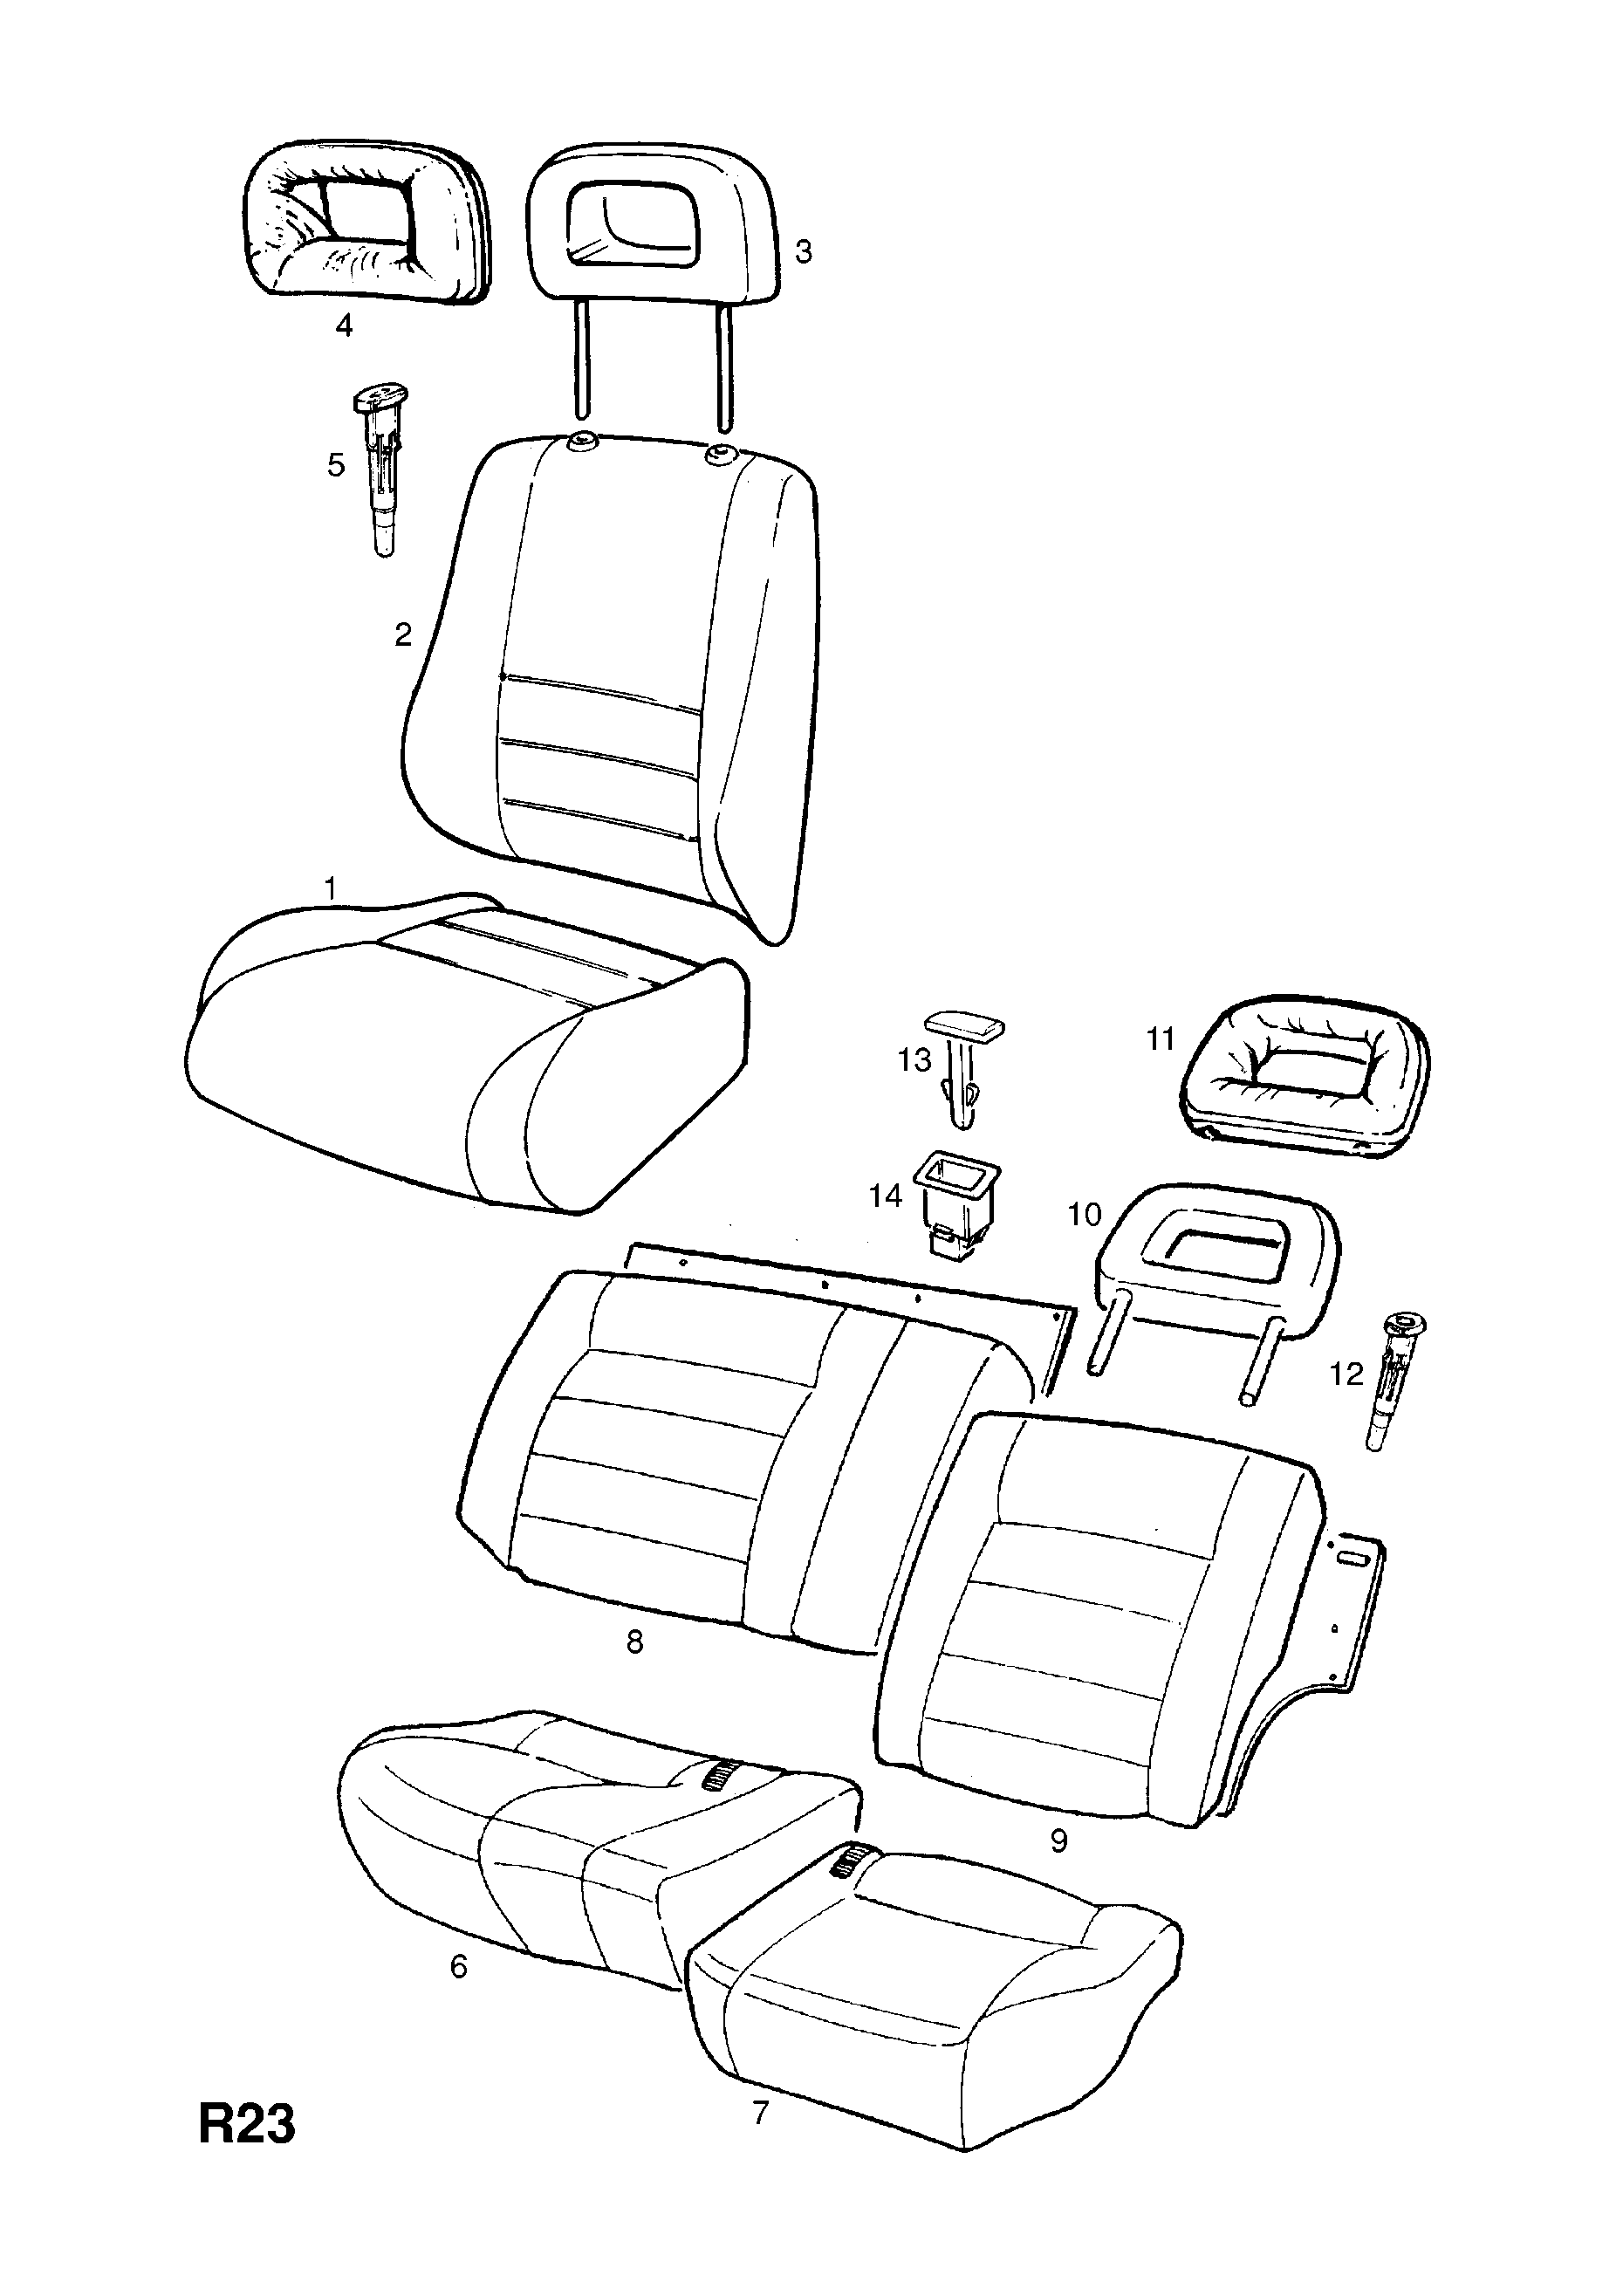 BACK PANEL LOCK FITTINGS <small><i>[REAR SEAT FRAME AND FITTINGS 4 DOOR WL4]</i></small>